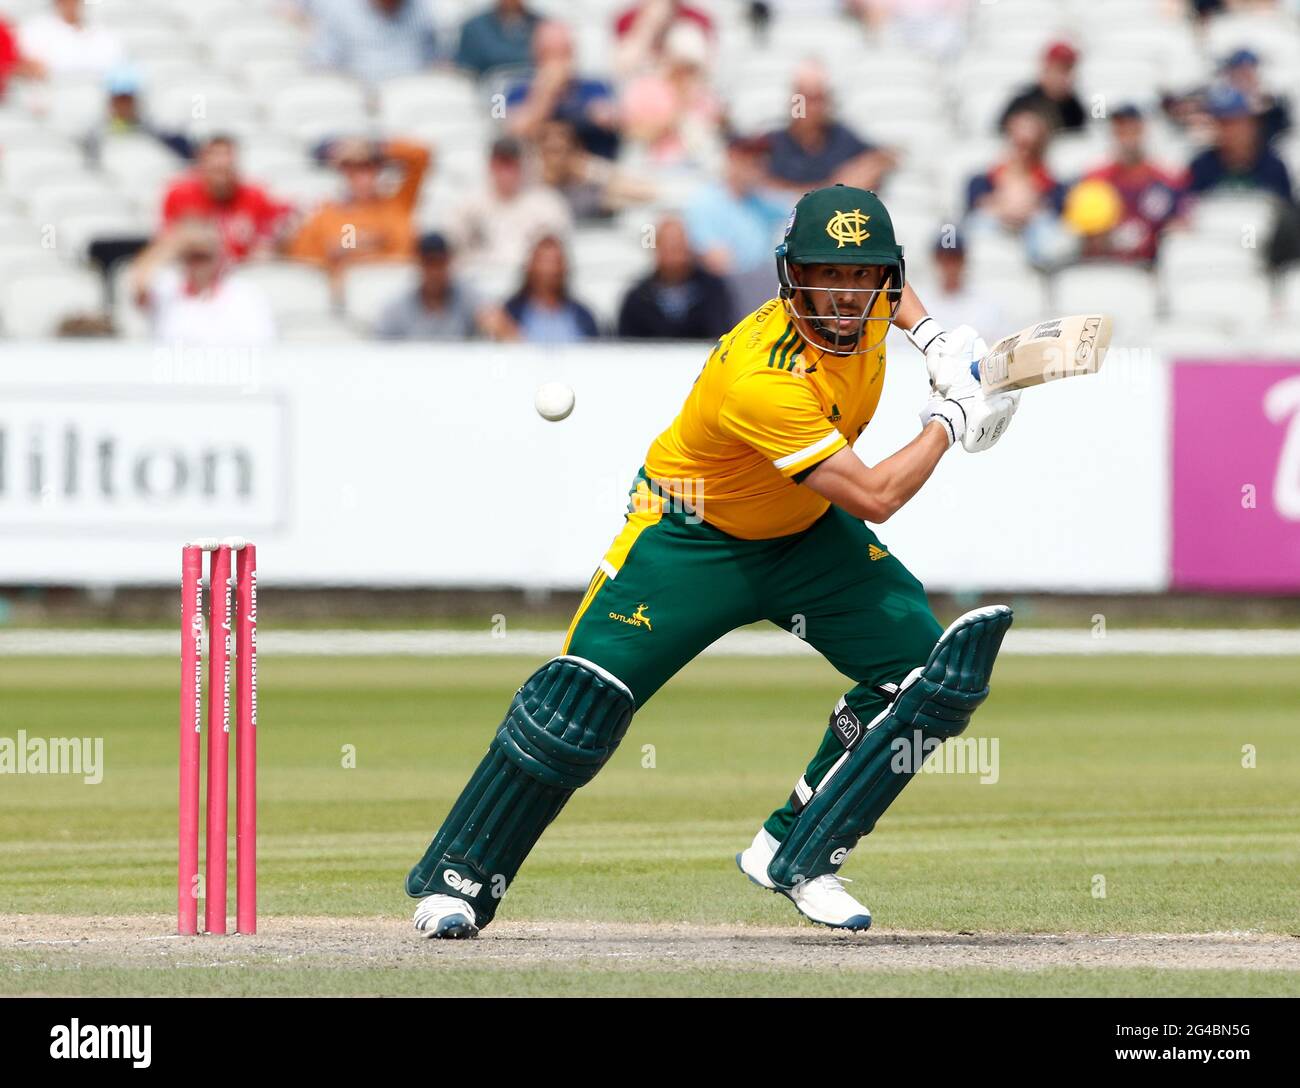 20th June 2021; Emirates Old Trafford, Manchester, Lancashire, England; Vitality Blast T20 Cricket, Lancashire Lightning versus Notts Outlaws; Tom Moores led the Notts Outlaws innings with a highest score of 48 Stock Photo